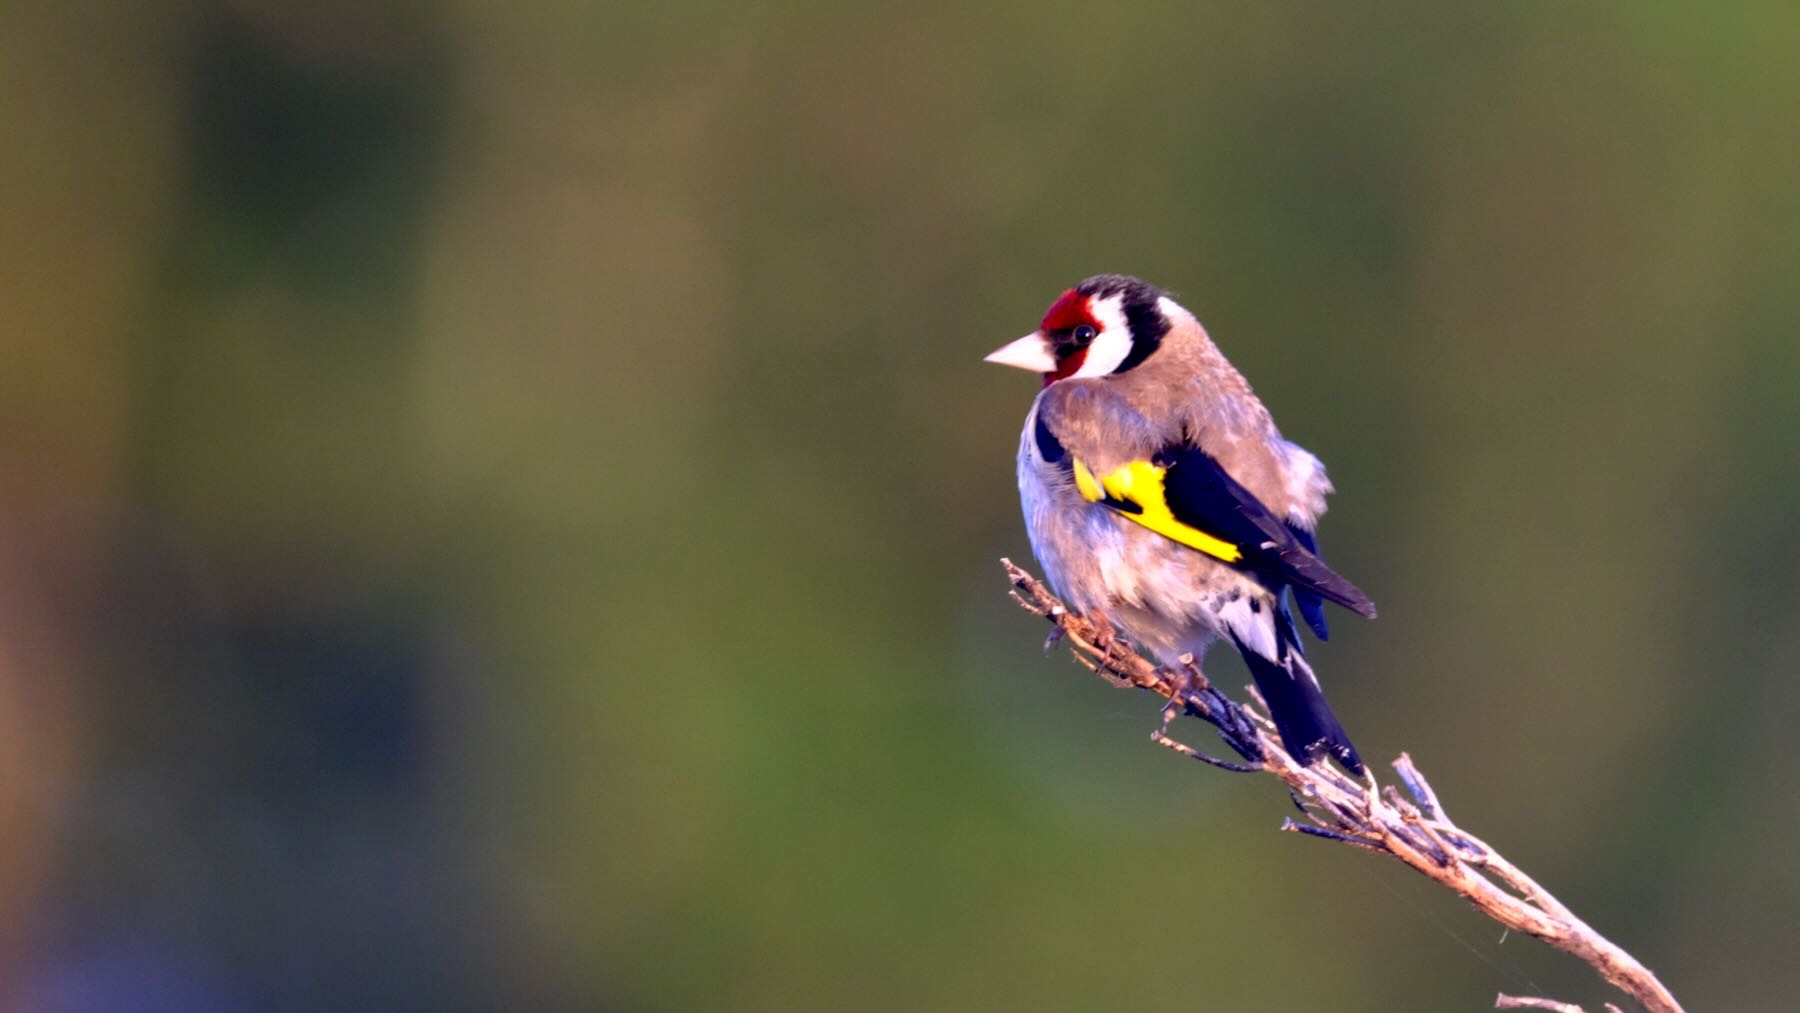 Small bird with white beak and red splash on face, gold stripe on wings on a flax spear. 